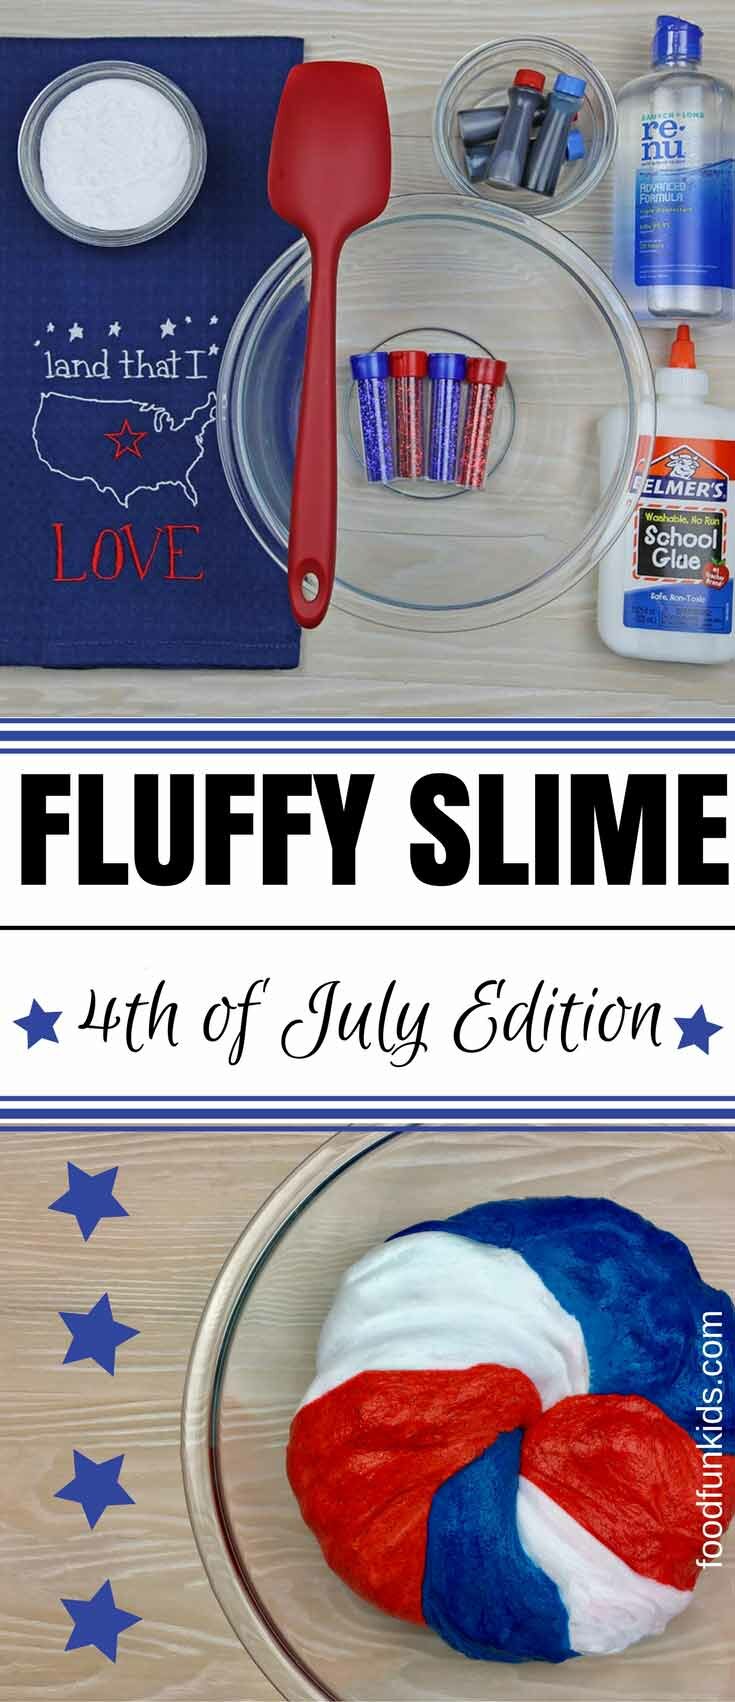 Kids love Slime.  Here is a fun way to get the kids involved at your BBQ with this Fluffy Slime 4th of July Edition.